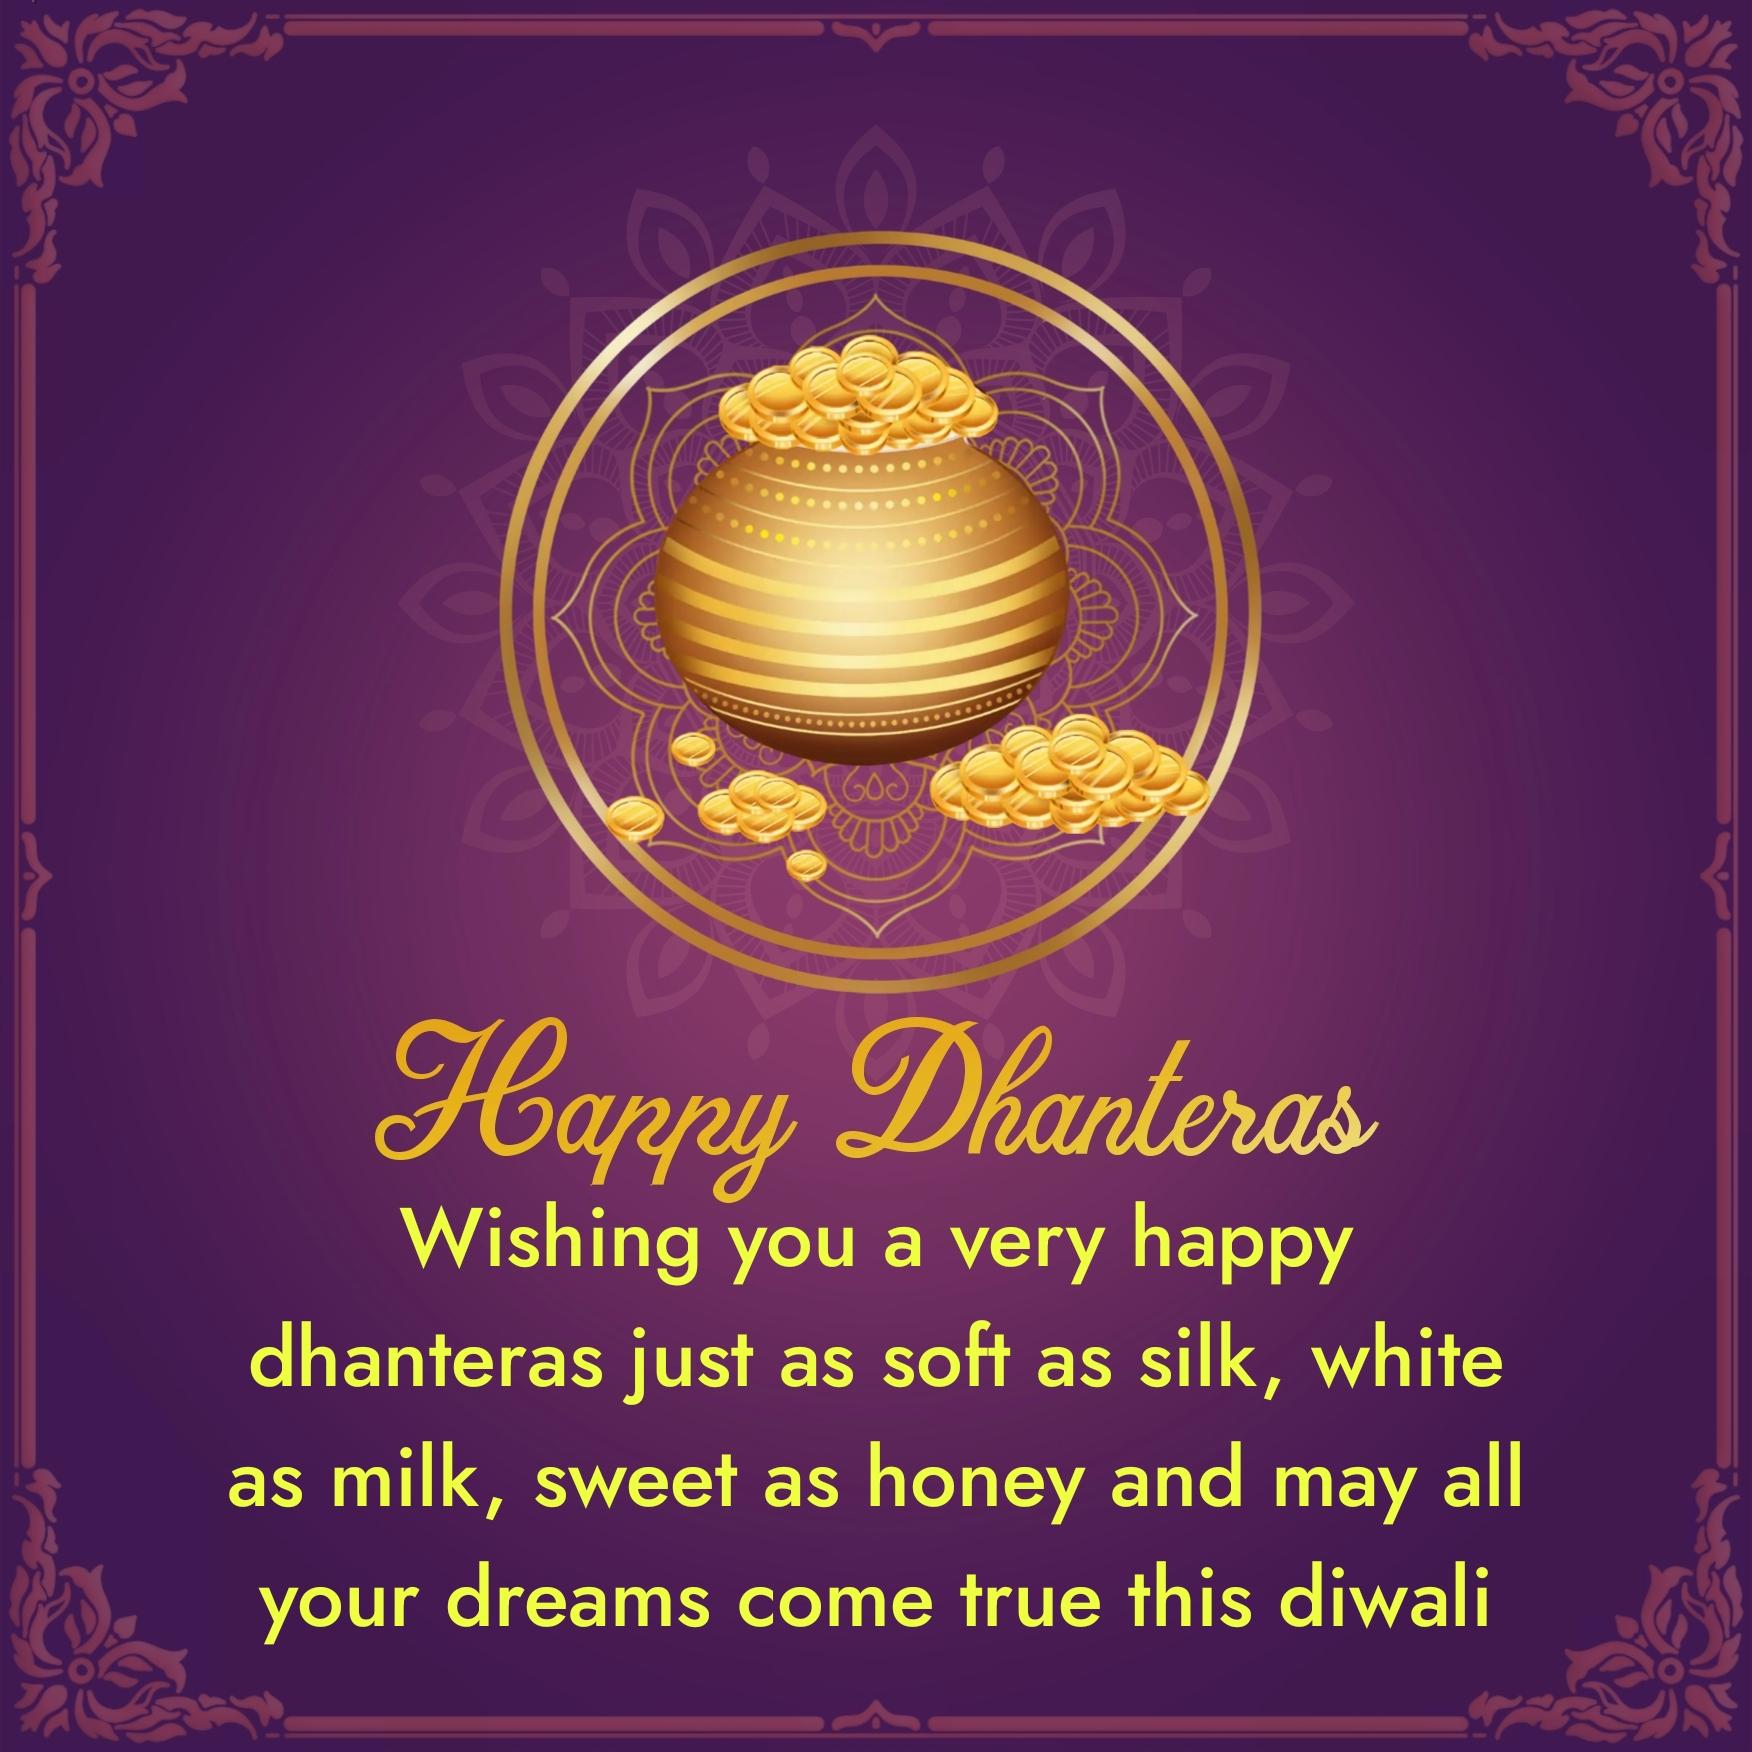 Wishing you a very happy dhanteras just as soft as silk